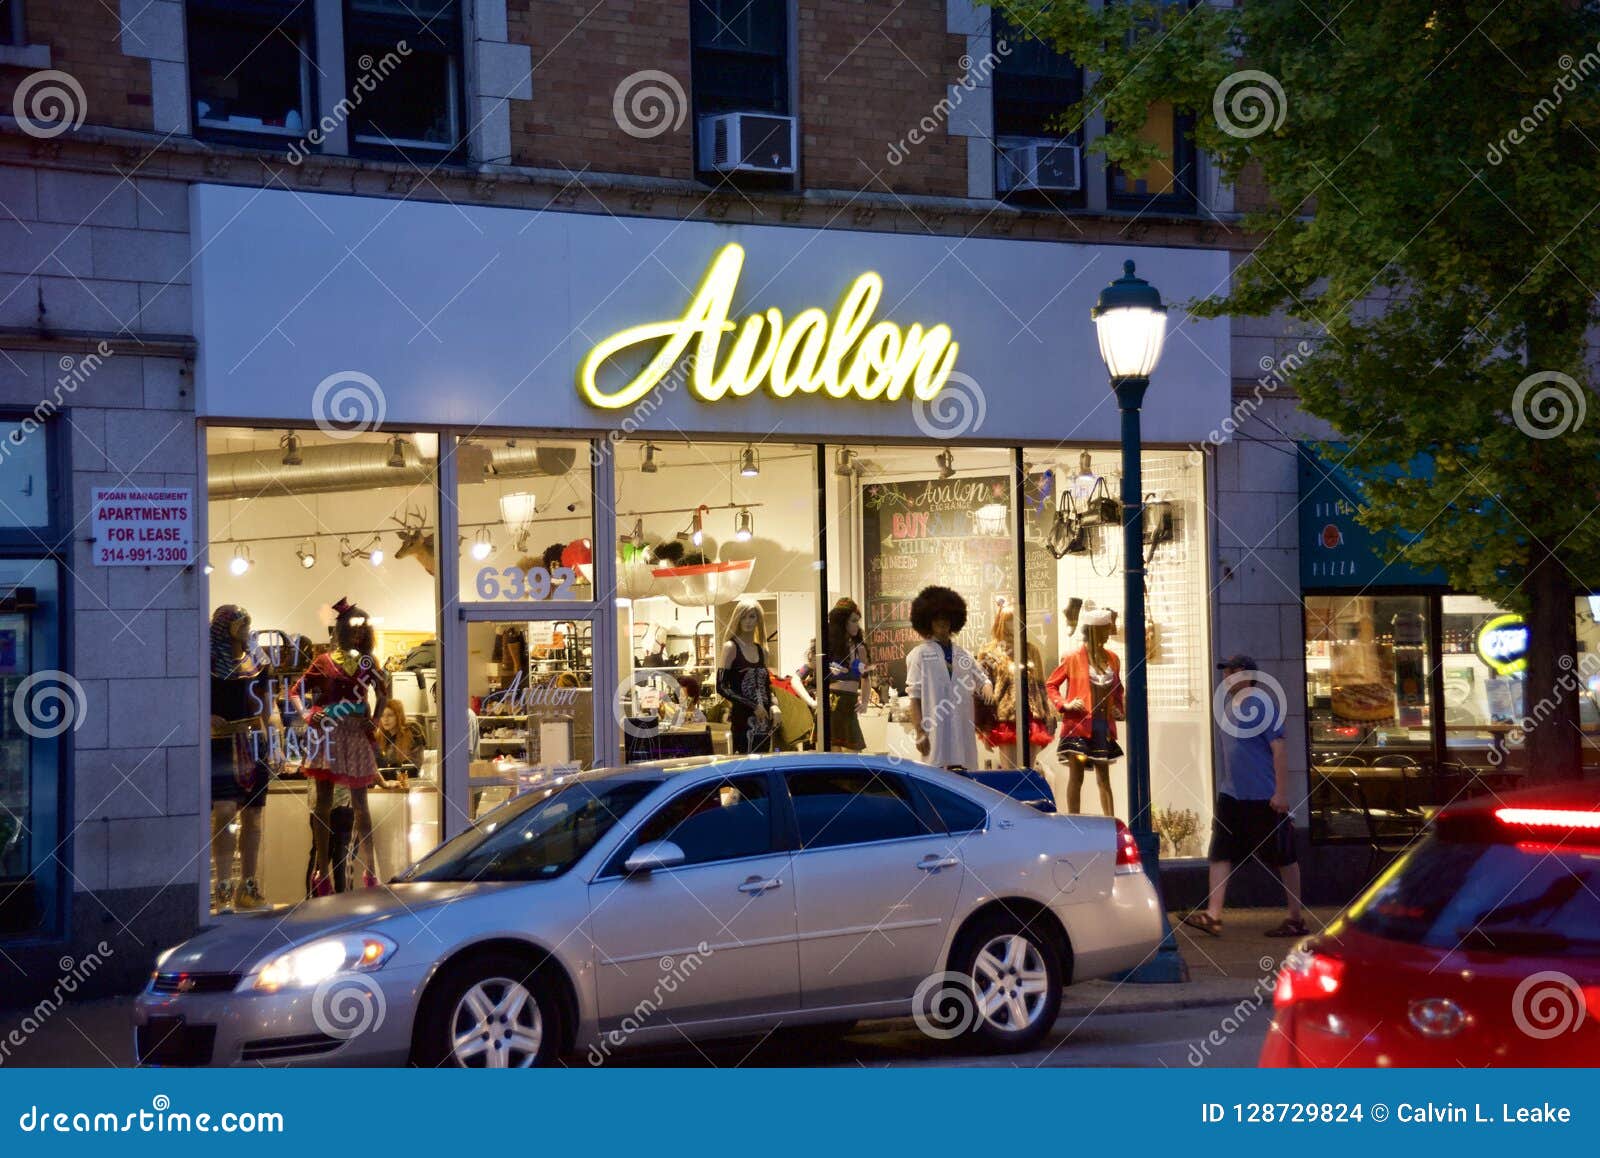 Avalon Clothing Store, St. Louis Missouri Editorial Stock Image - Image of prices, store: 128729824